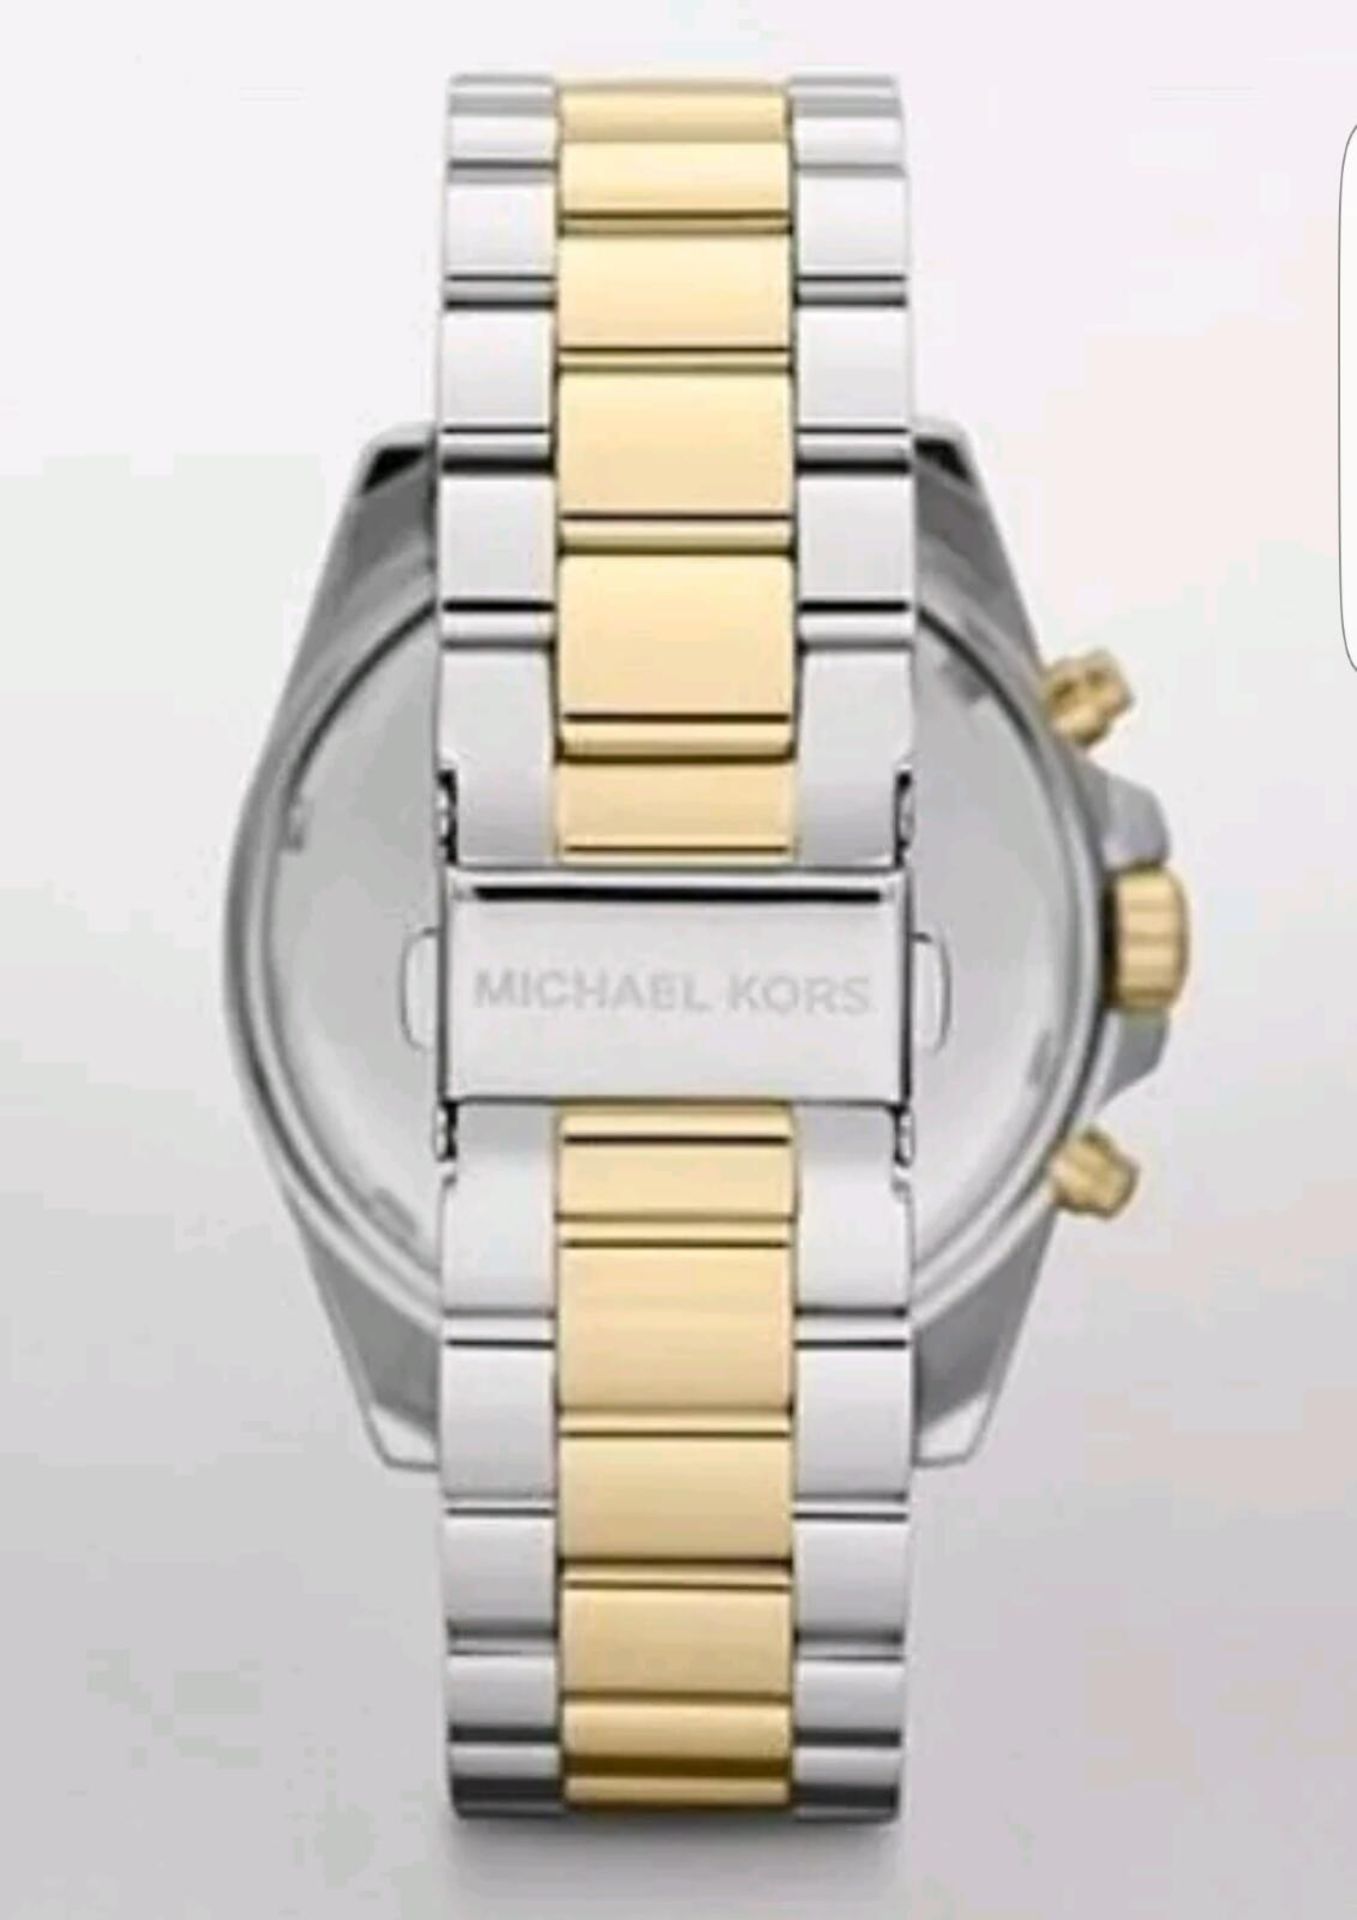 BRAND NEW LADIES MICHAEL KORS WATCH ¾MK5627, COMPLETE WITH ORIGINAL PACKAGING AND MANUAL - Image 2 of 2